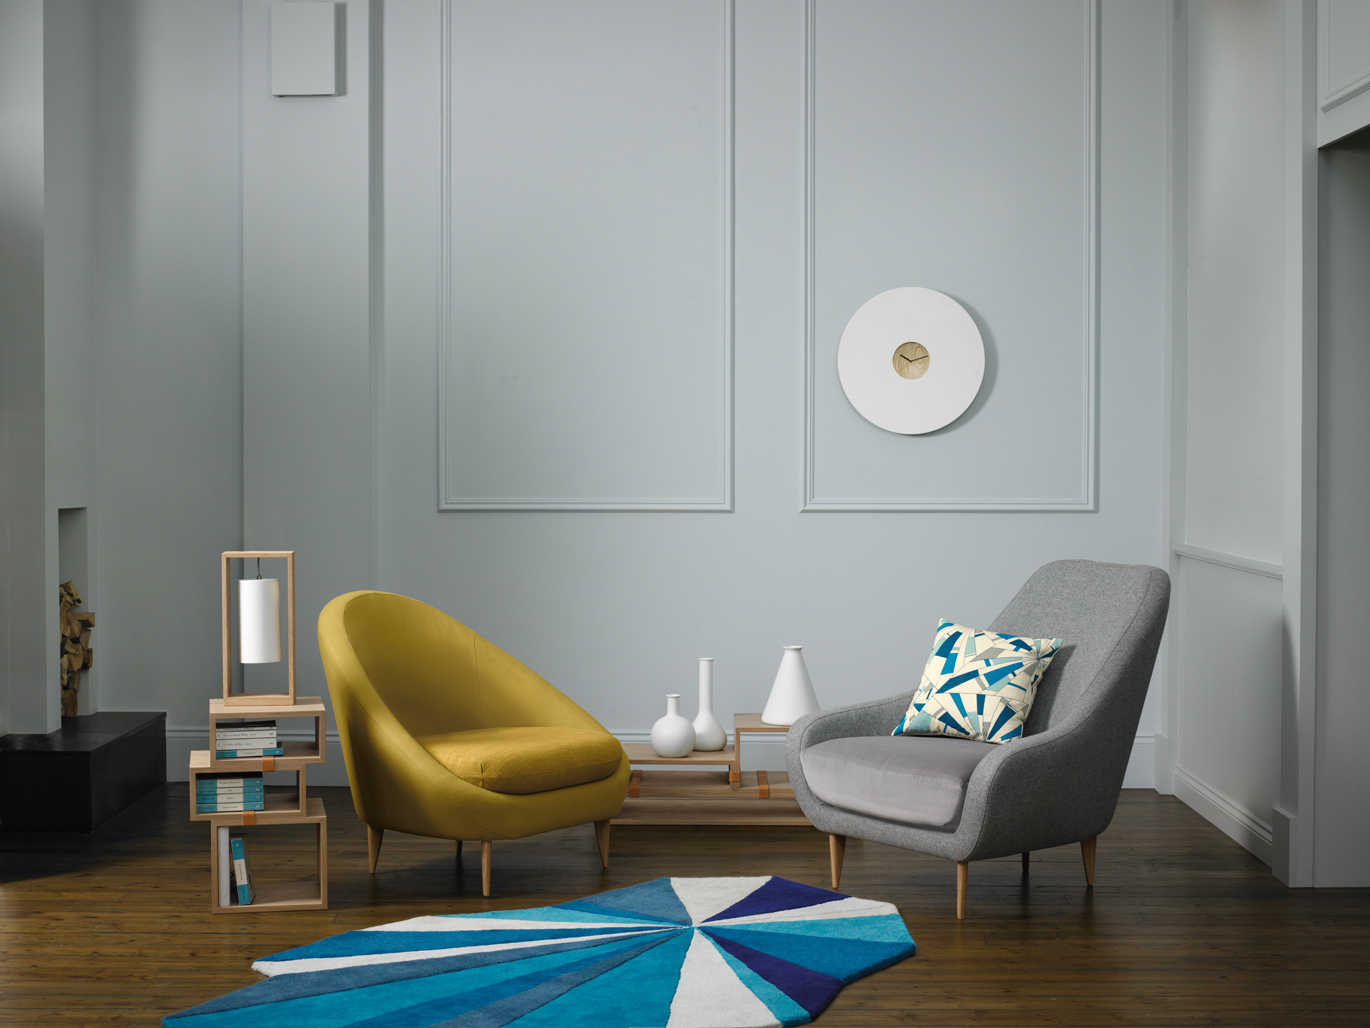 part of the Conran collaboration with Marks & Spencer